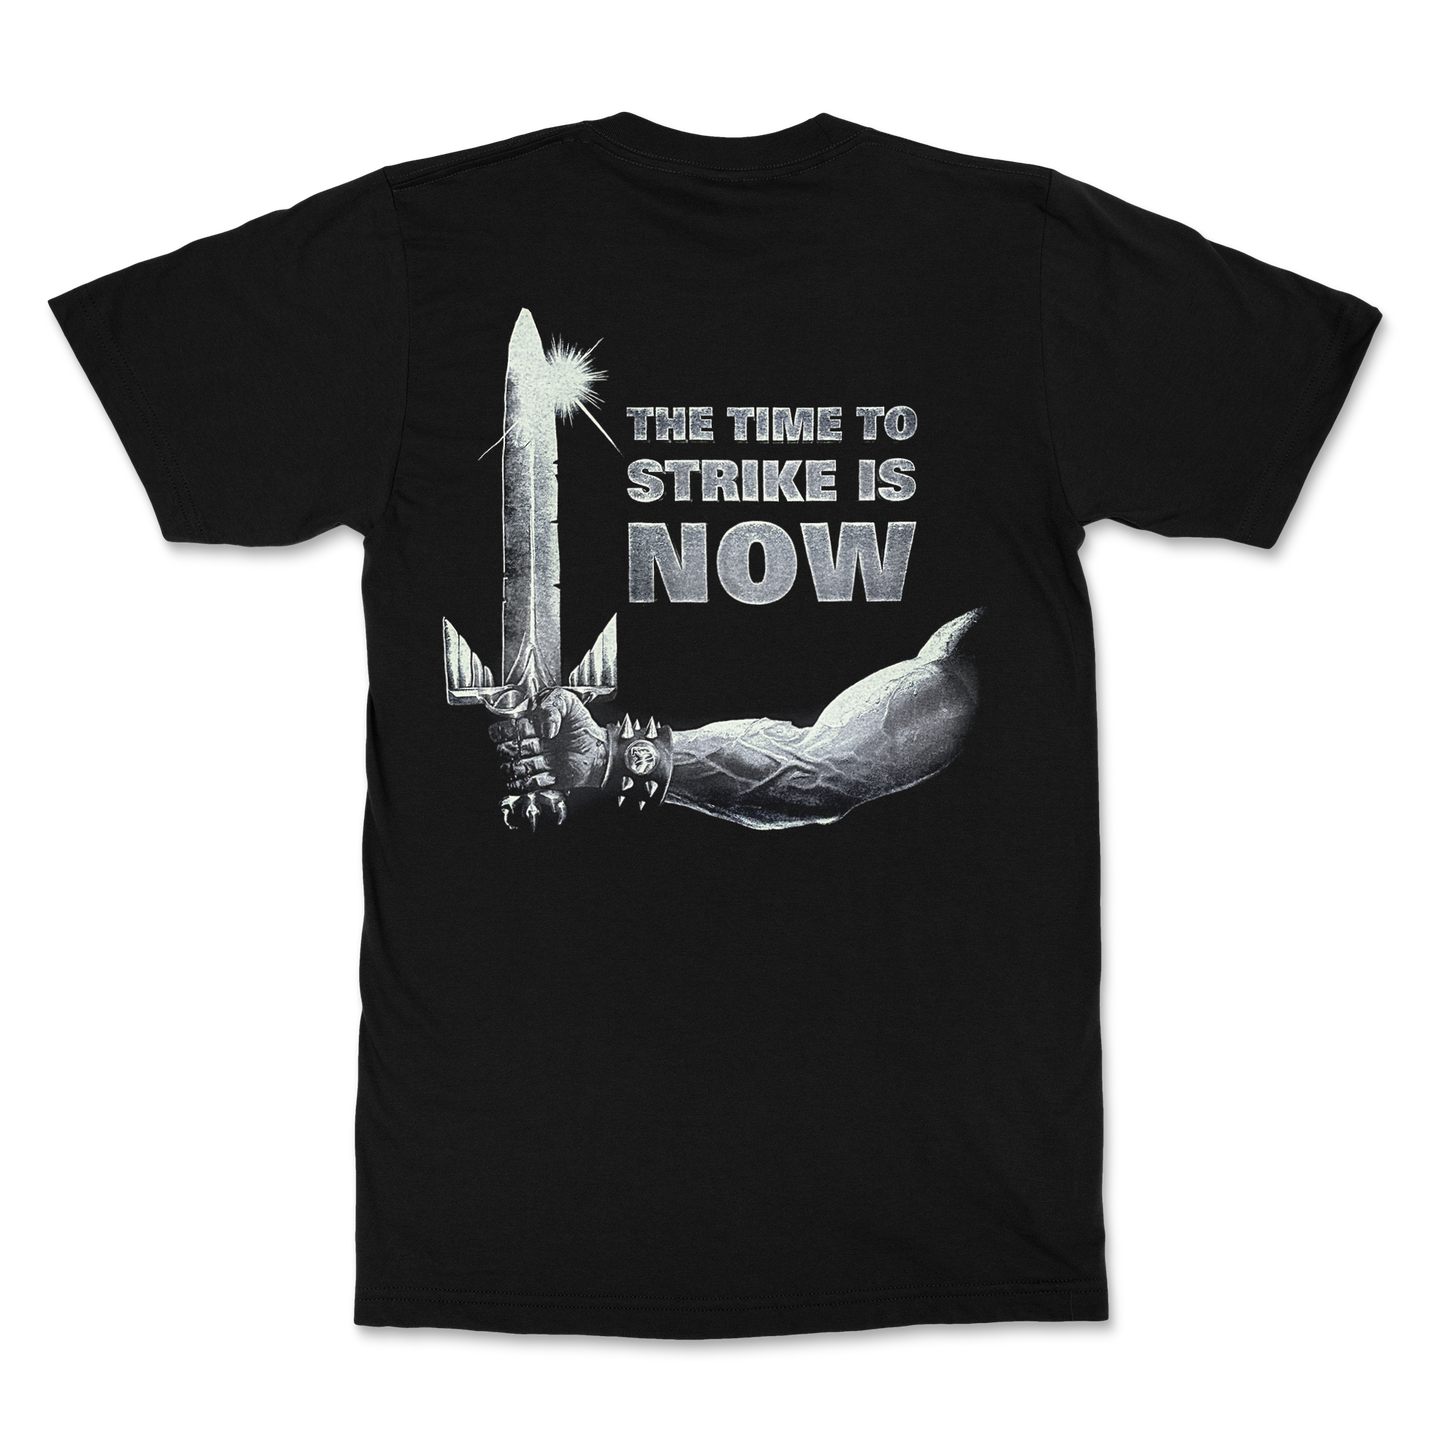 T-Shirt Battle Hymns - The time to strike is now